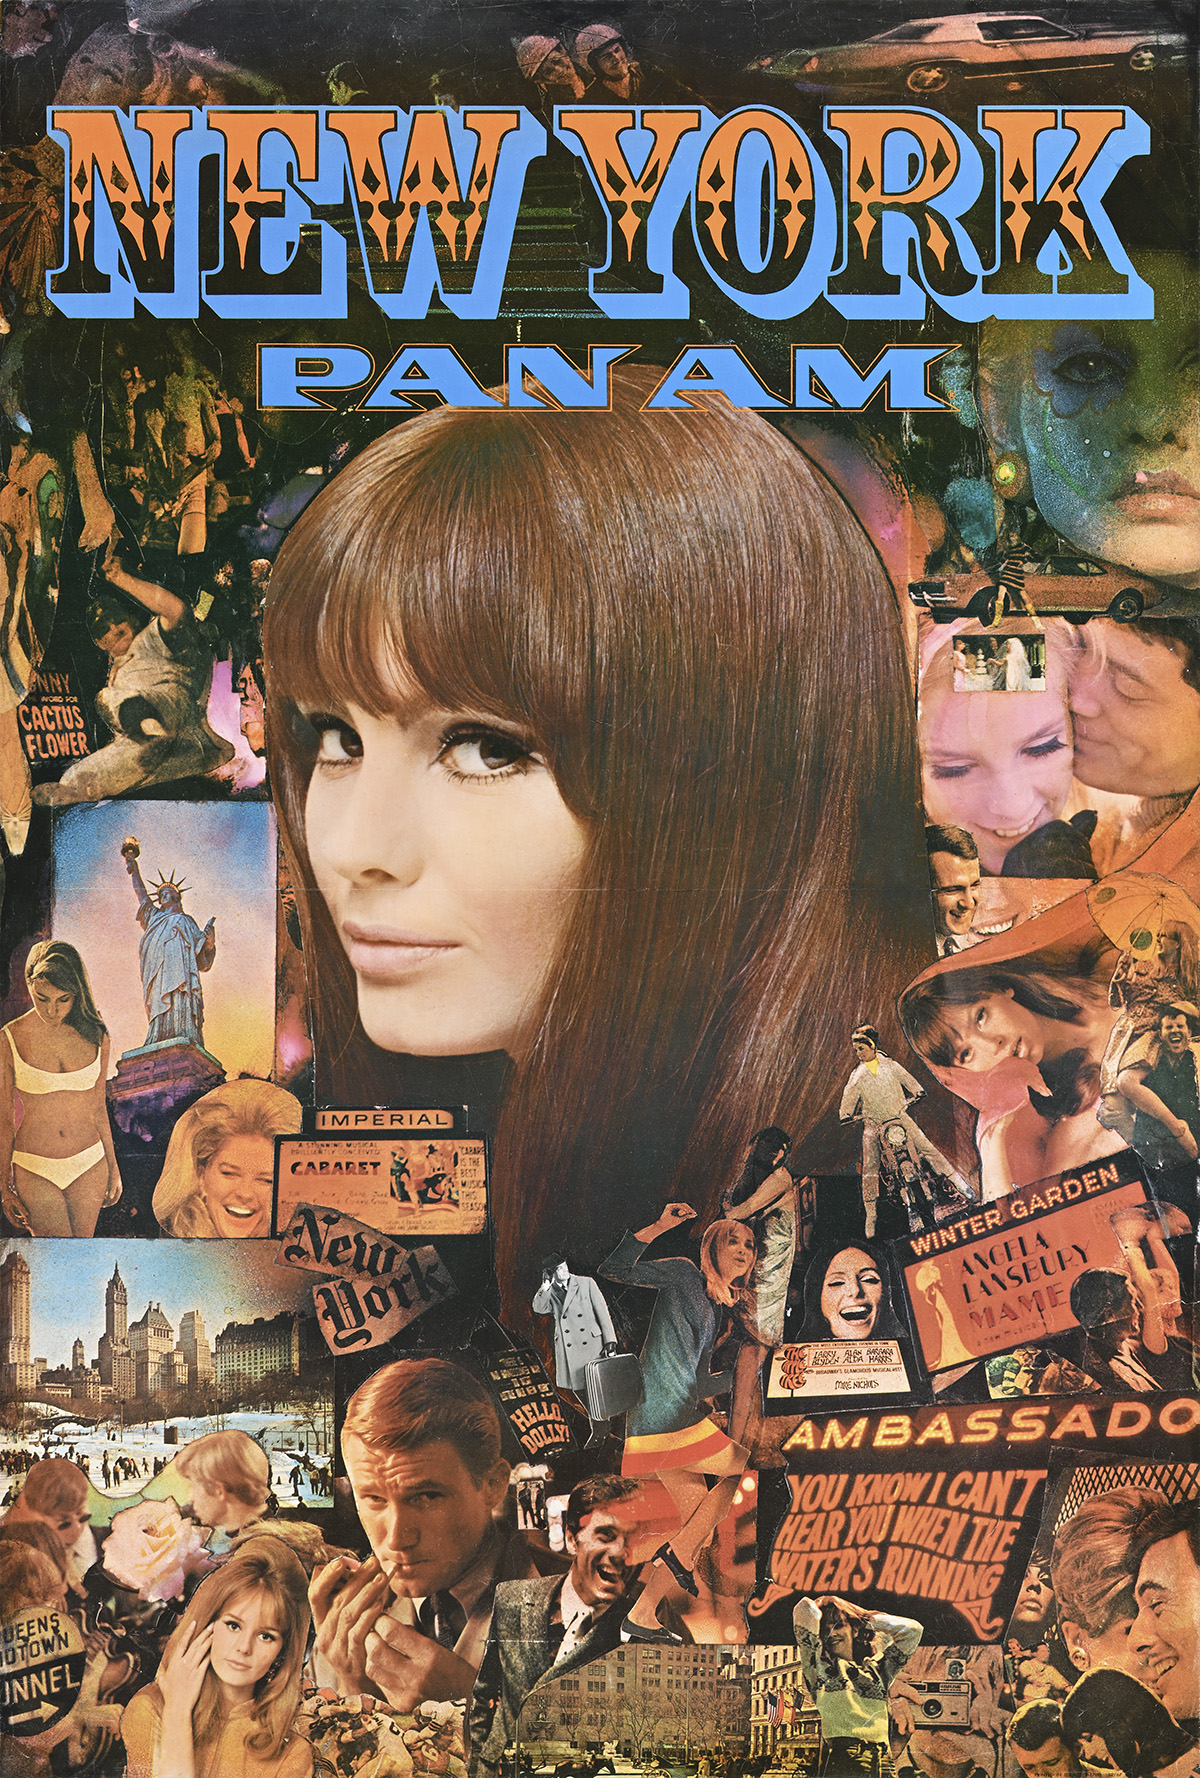 A collage-style poster of a woman's face glancing at the viewer, surrounded by city life images.